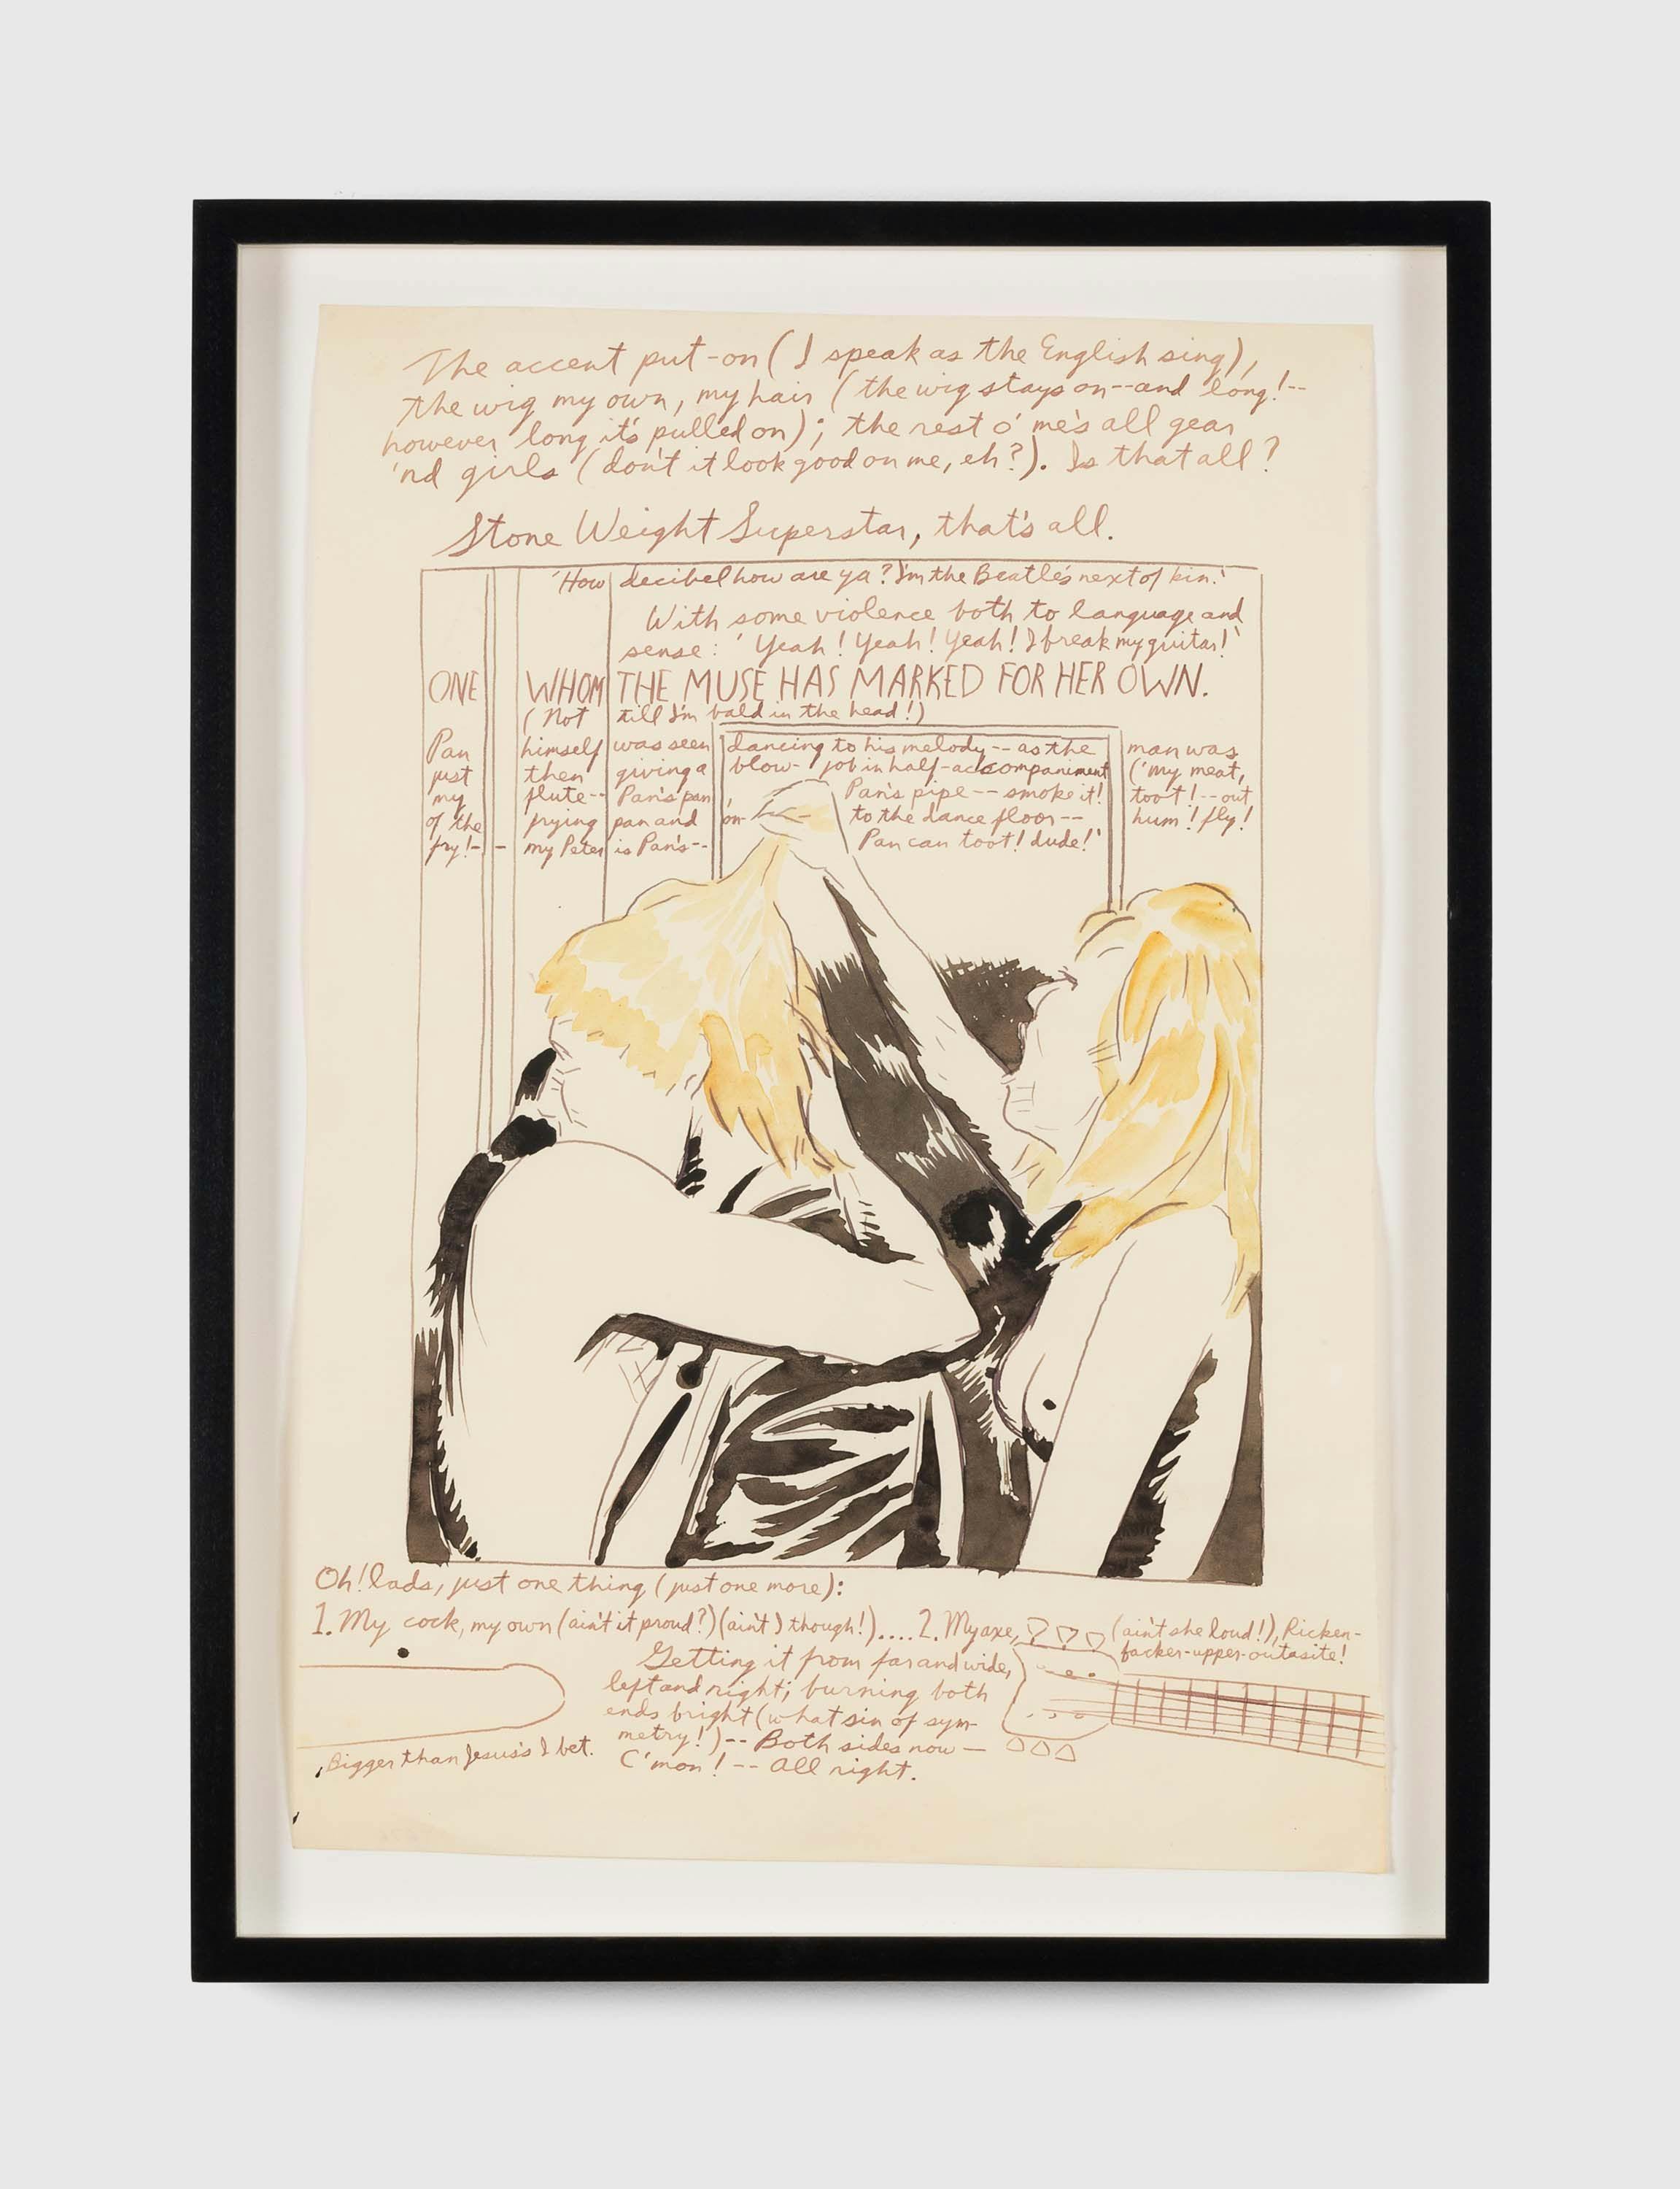 A drawing by Raymond Pettibon titled No Title (The accent put-on...), dated 1991.